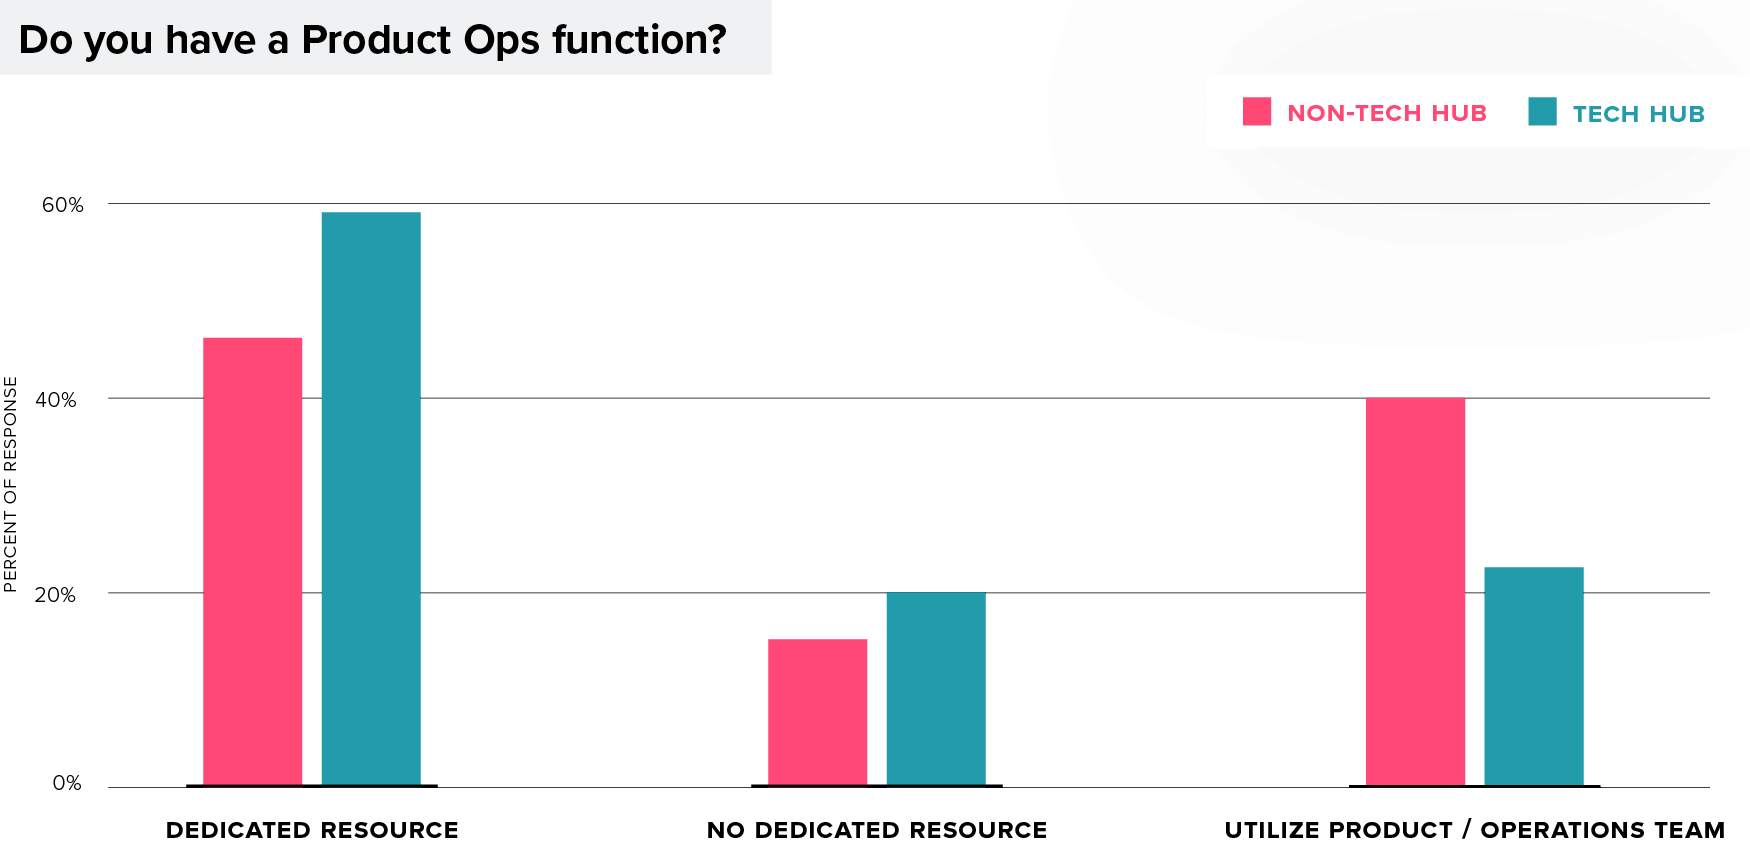 Do you have a product ops function